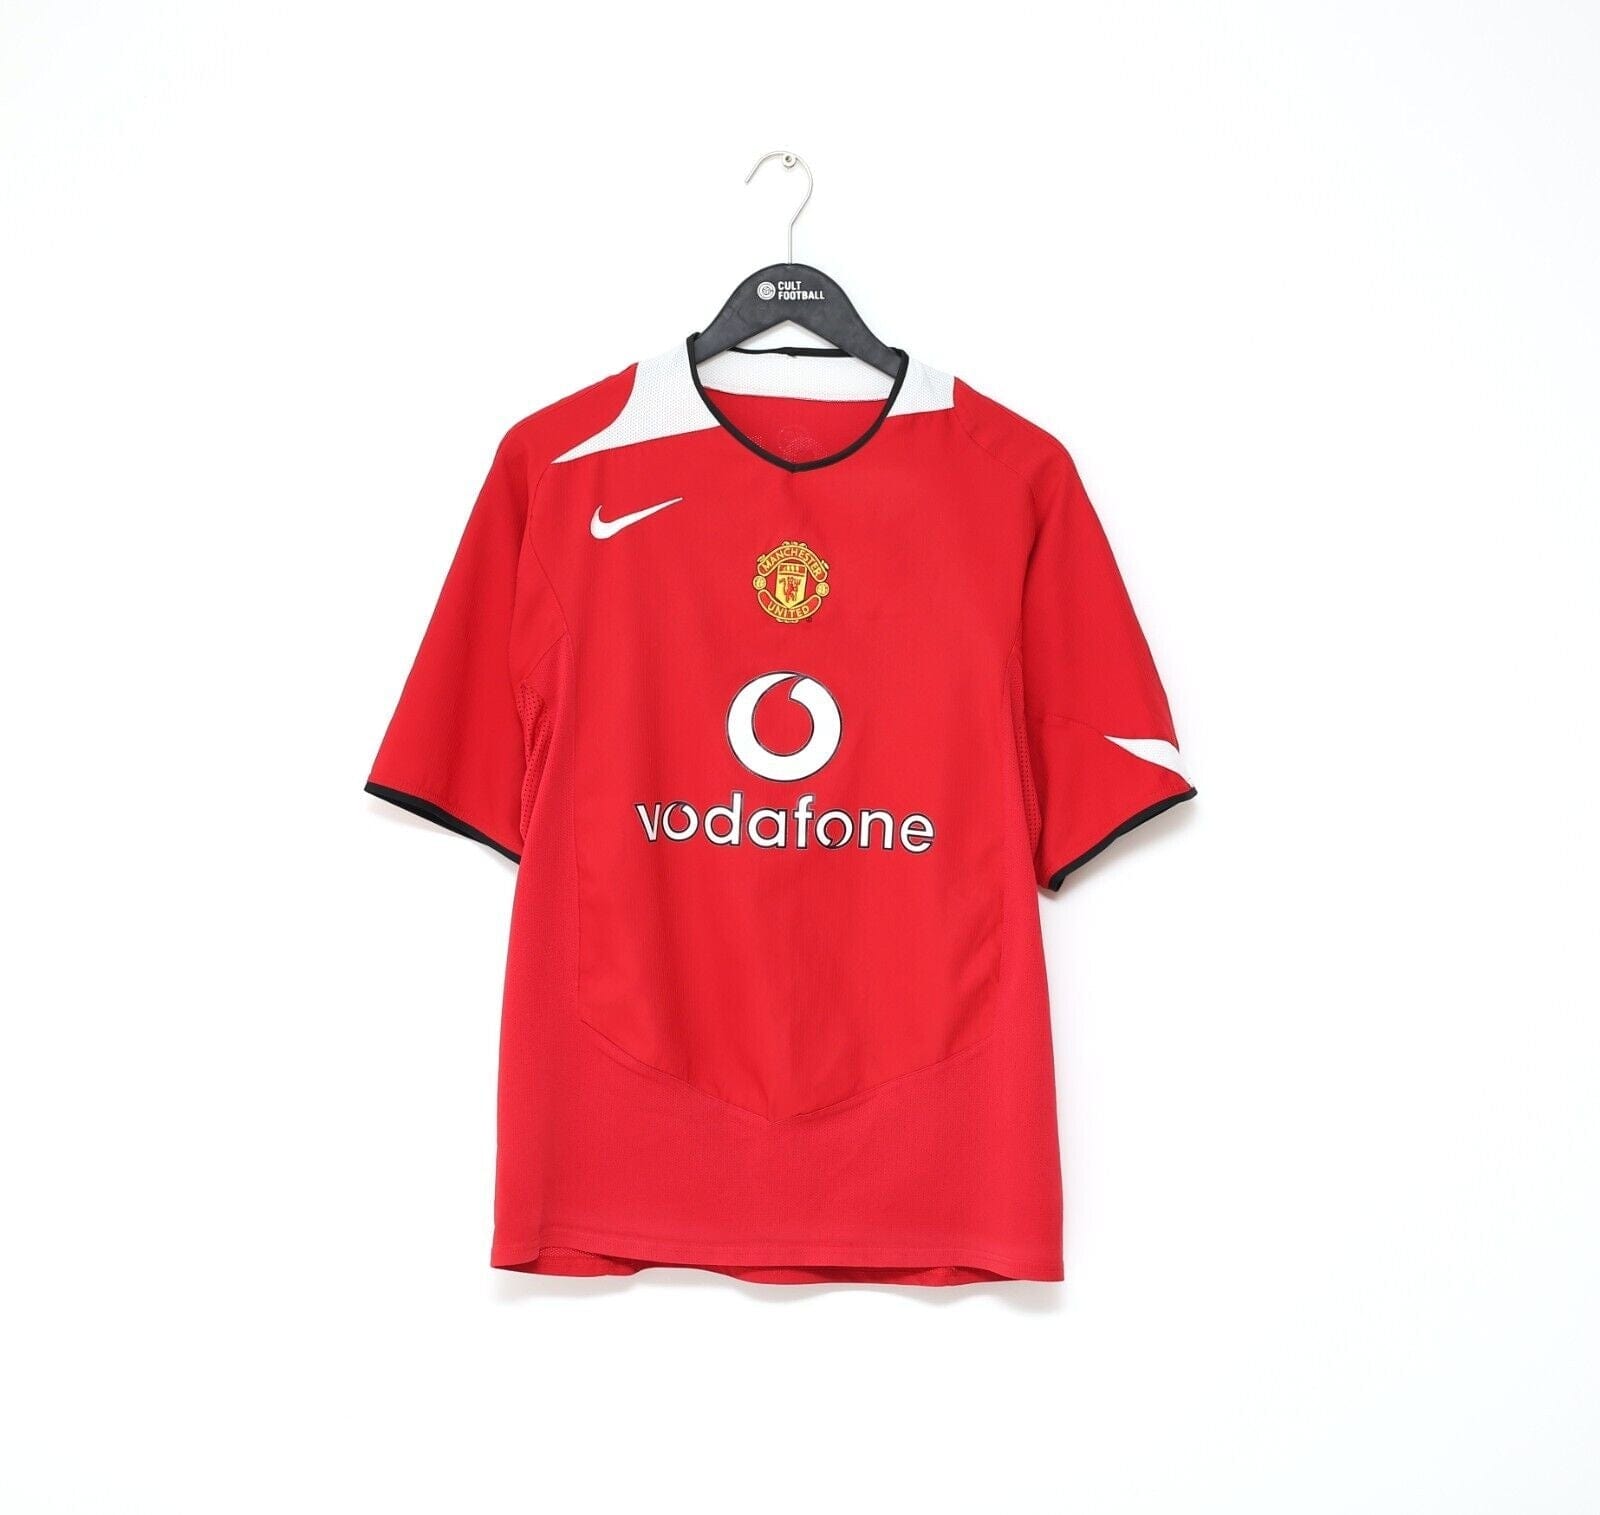 2004/06 ROONEY #8 Manchester United Vintage Nike CL Home Football Shirt (M)